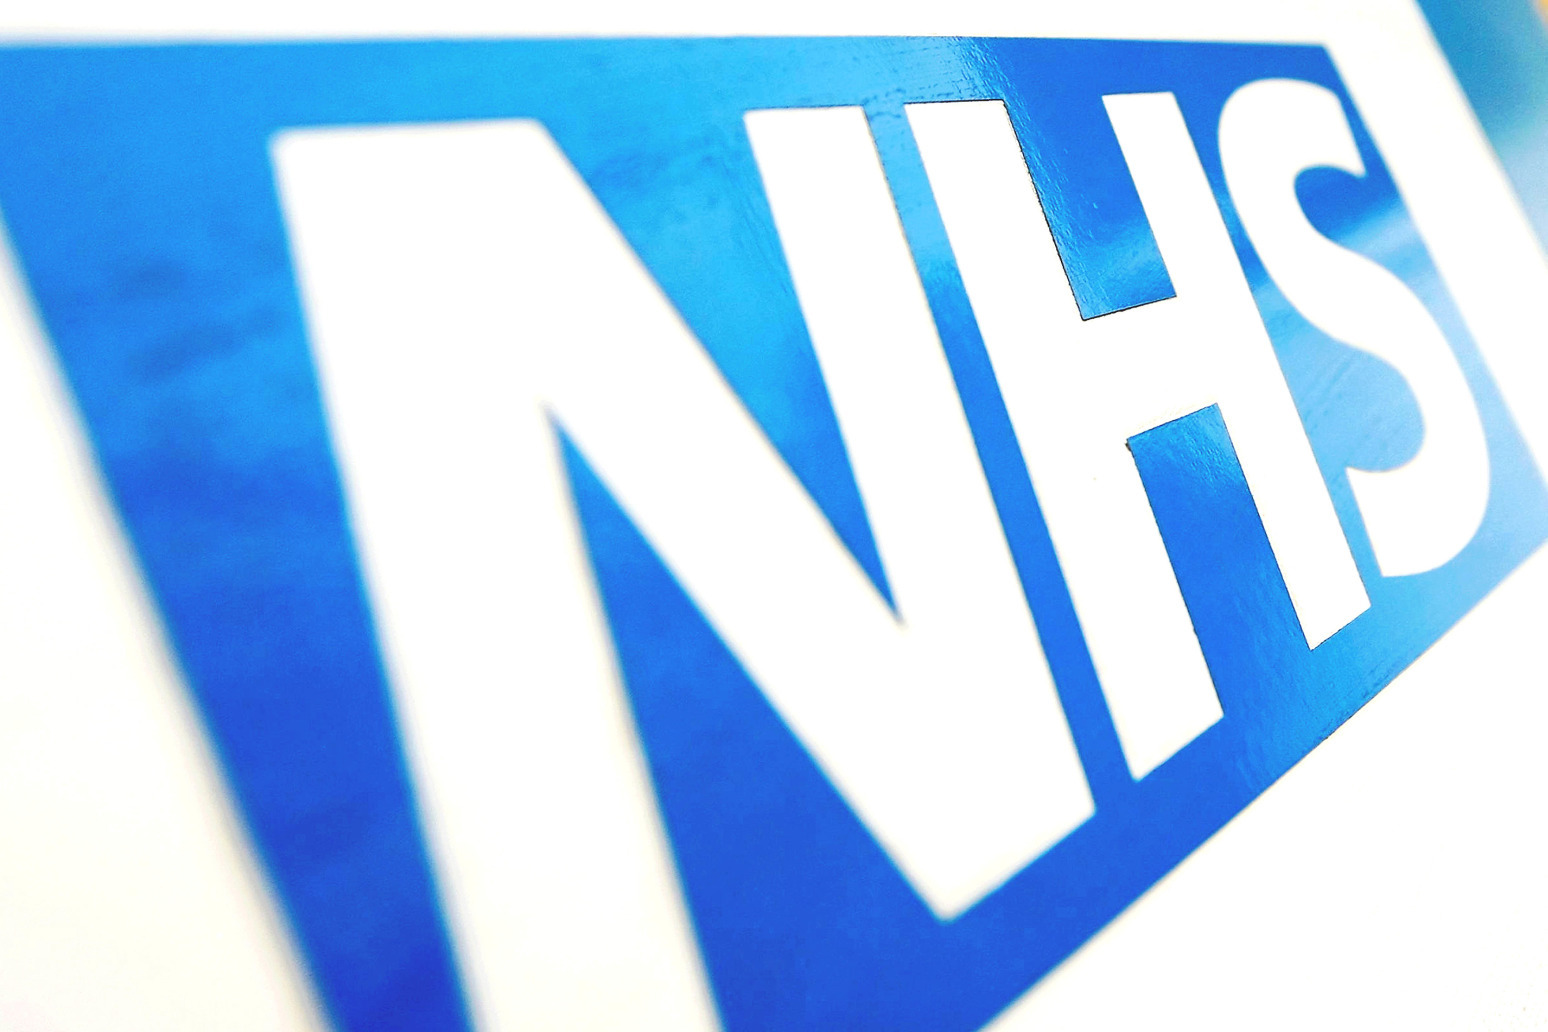 New hospital opening to tackle NHS backlog and long patient waiting times